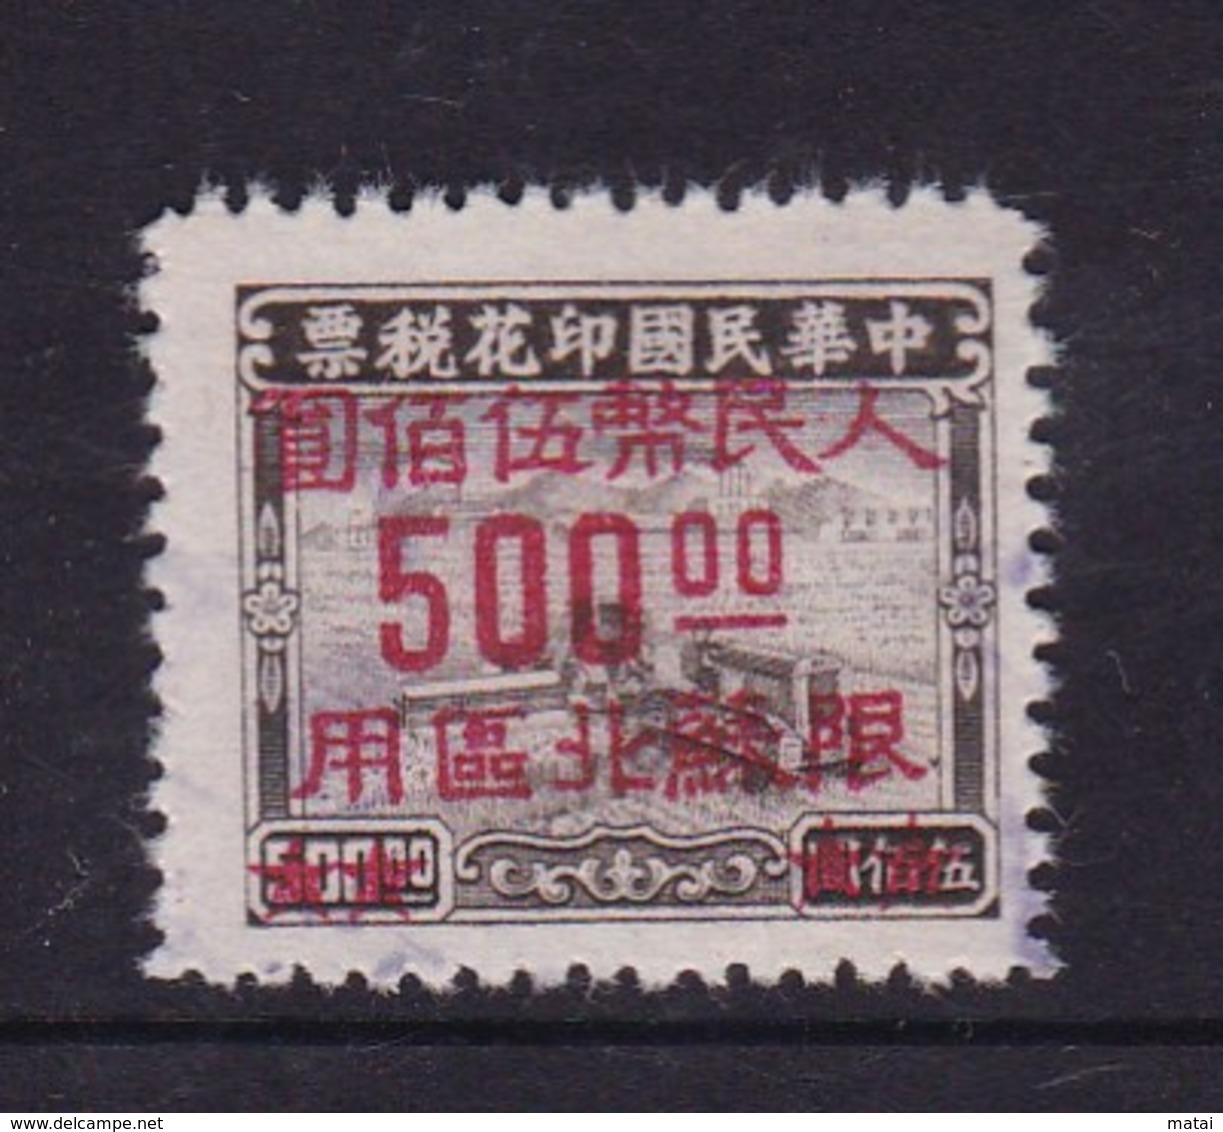 CHINA CHINE CINA  USED LIMITED TO NORTH JIANGSU  REVENUE FISCAL  STAMP RARE!! - Central China 1948-49